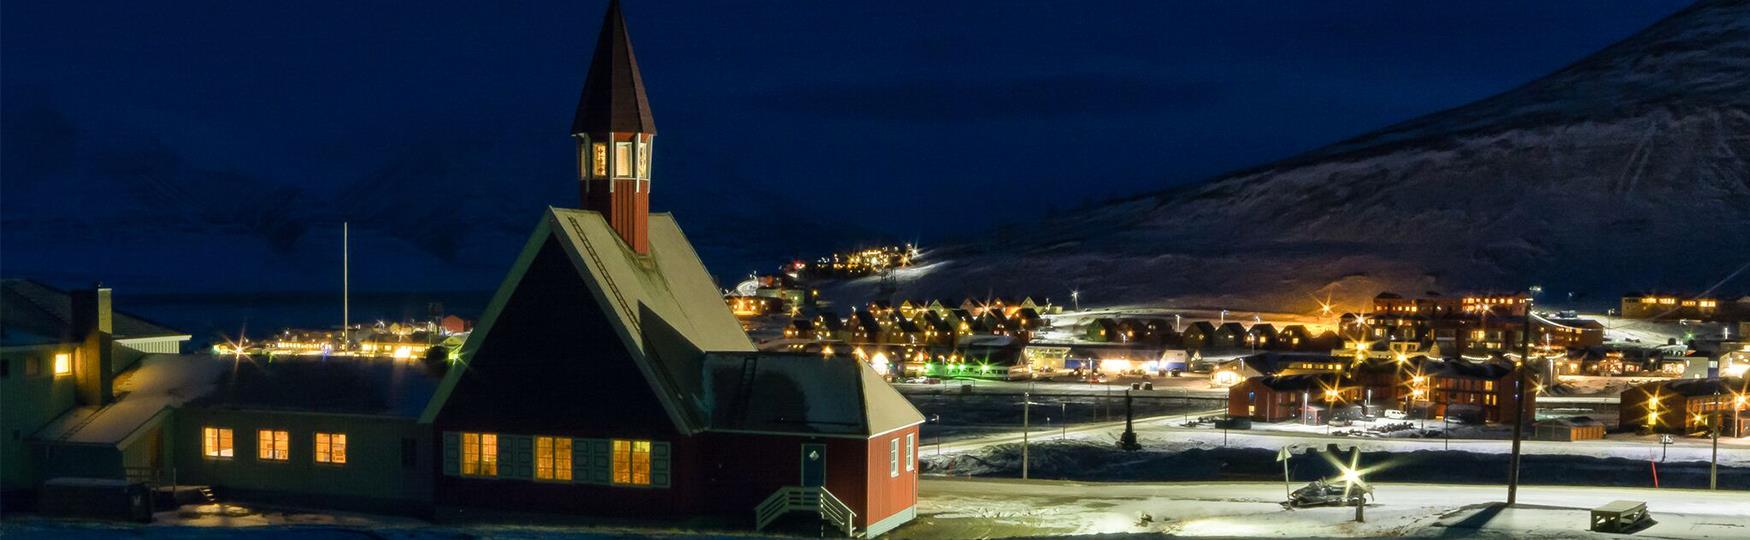 Welcome to Christmas in Longyearbyen